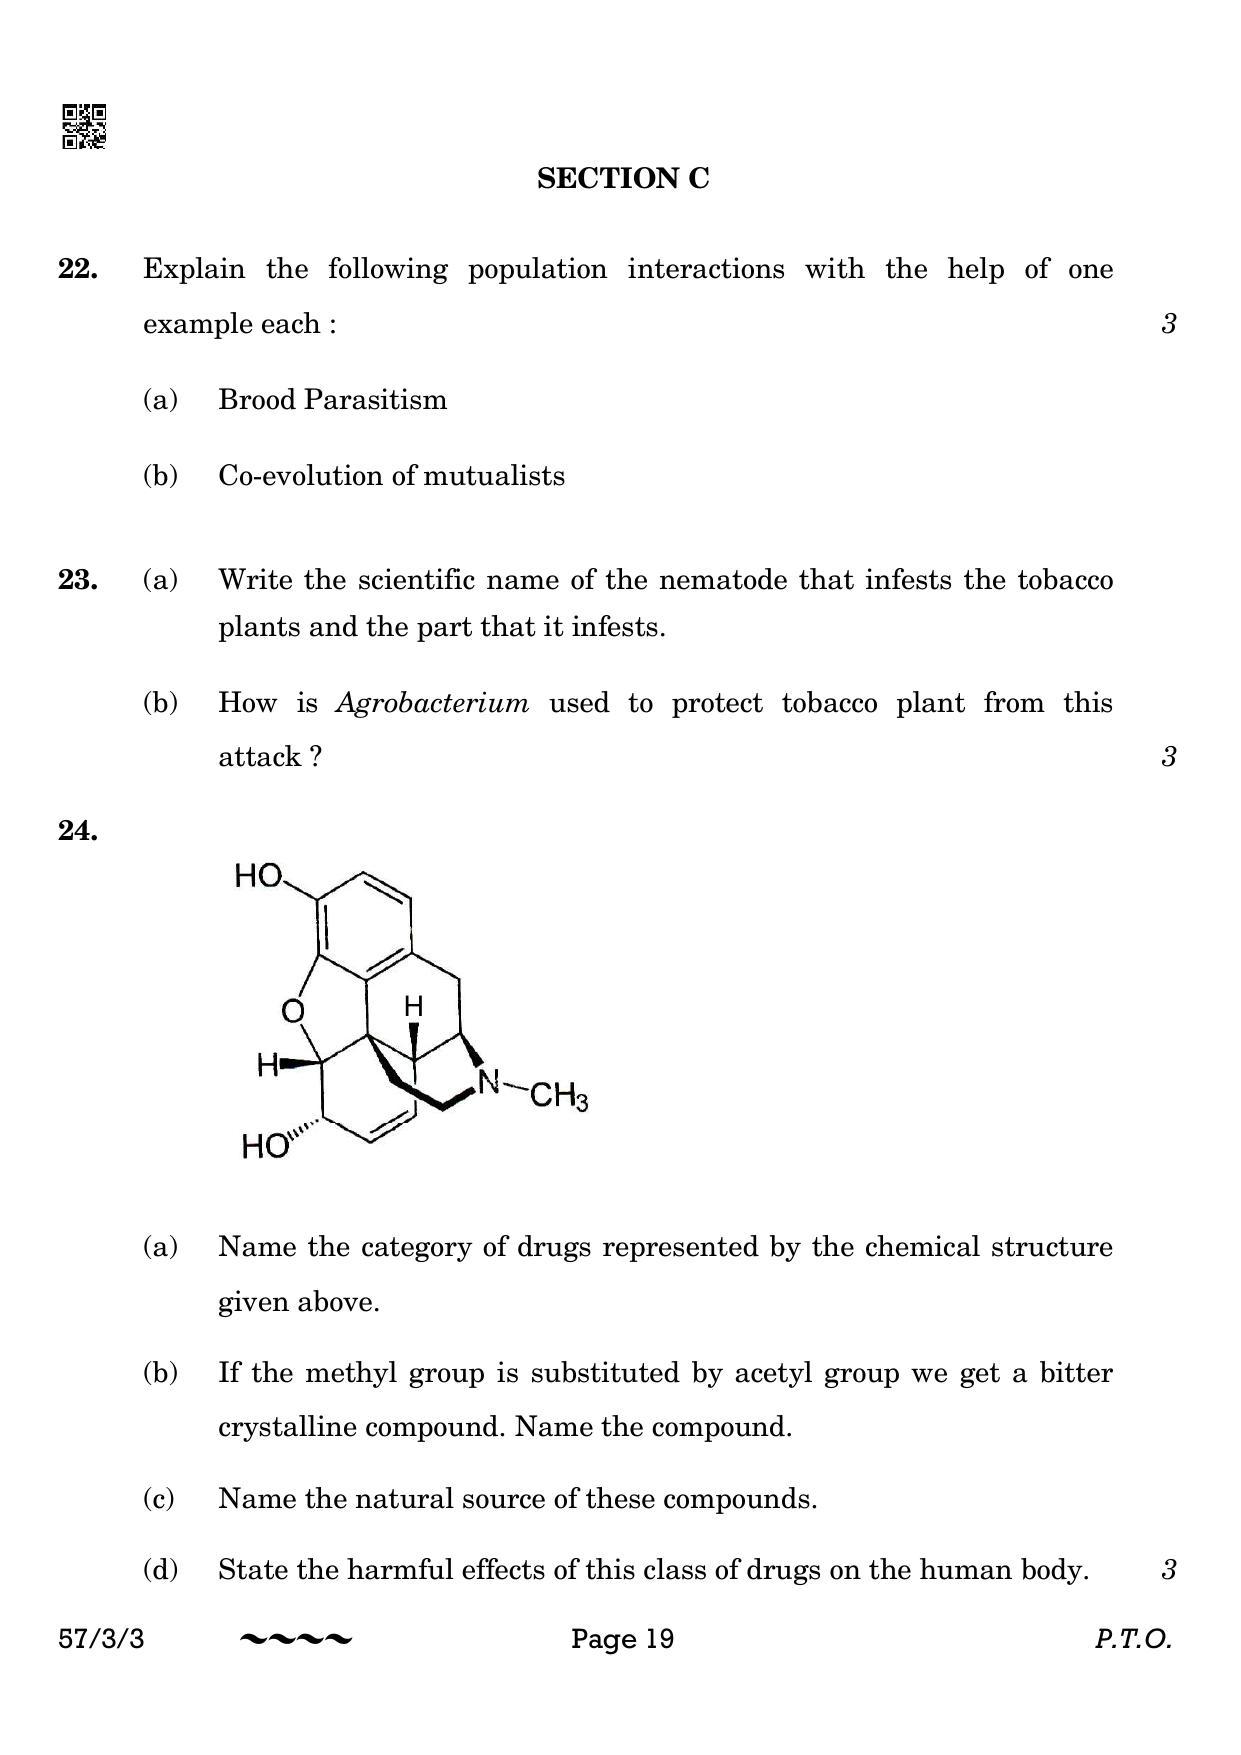 CBSE Class 12 57-3-3 Biology 2023 Question Paper - Page 19